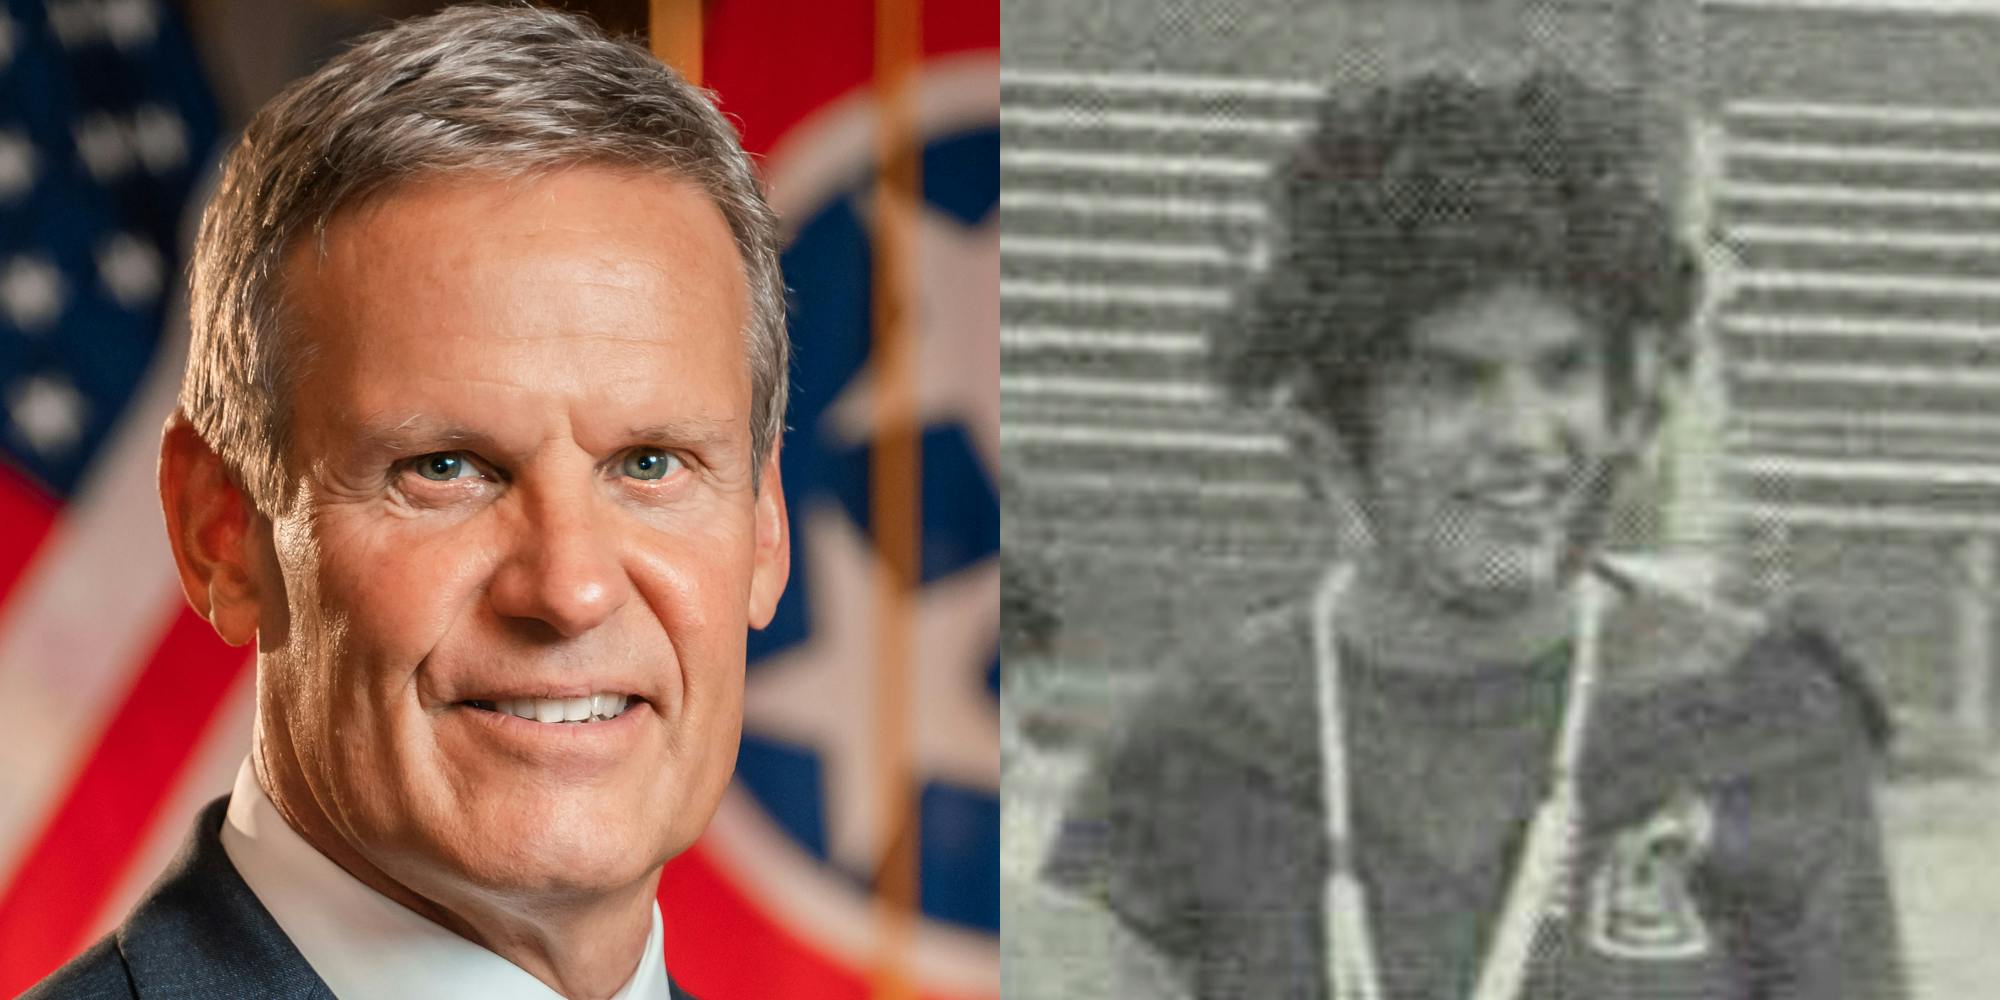 Governor Lee Yearbook Photo Dressed In Drag